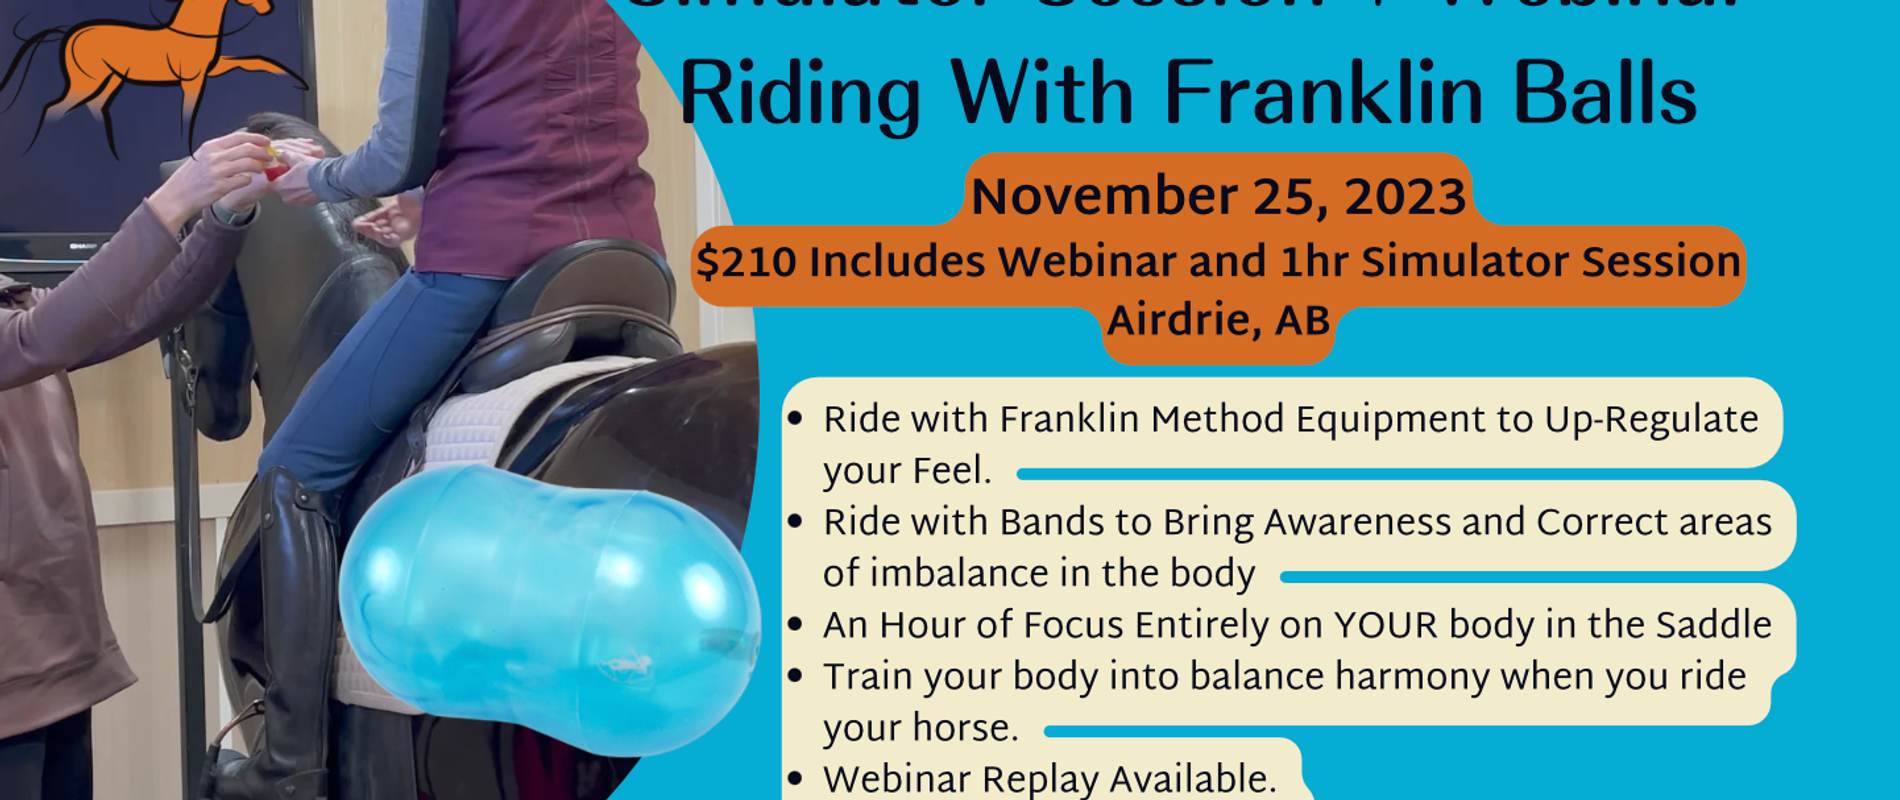 Poster for event that includes a simulated horse and rider